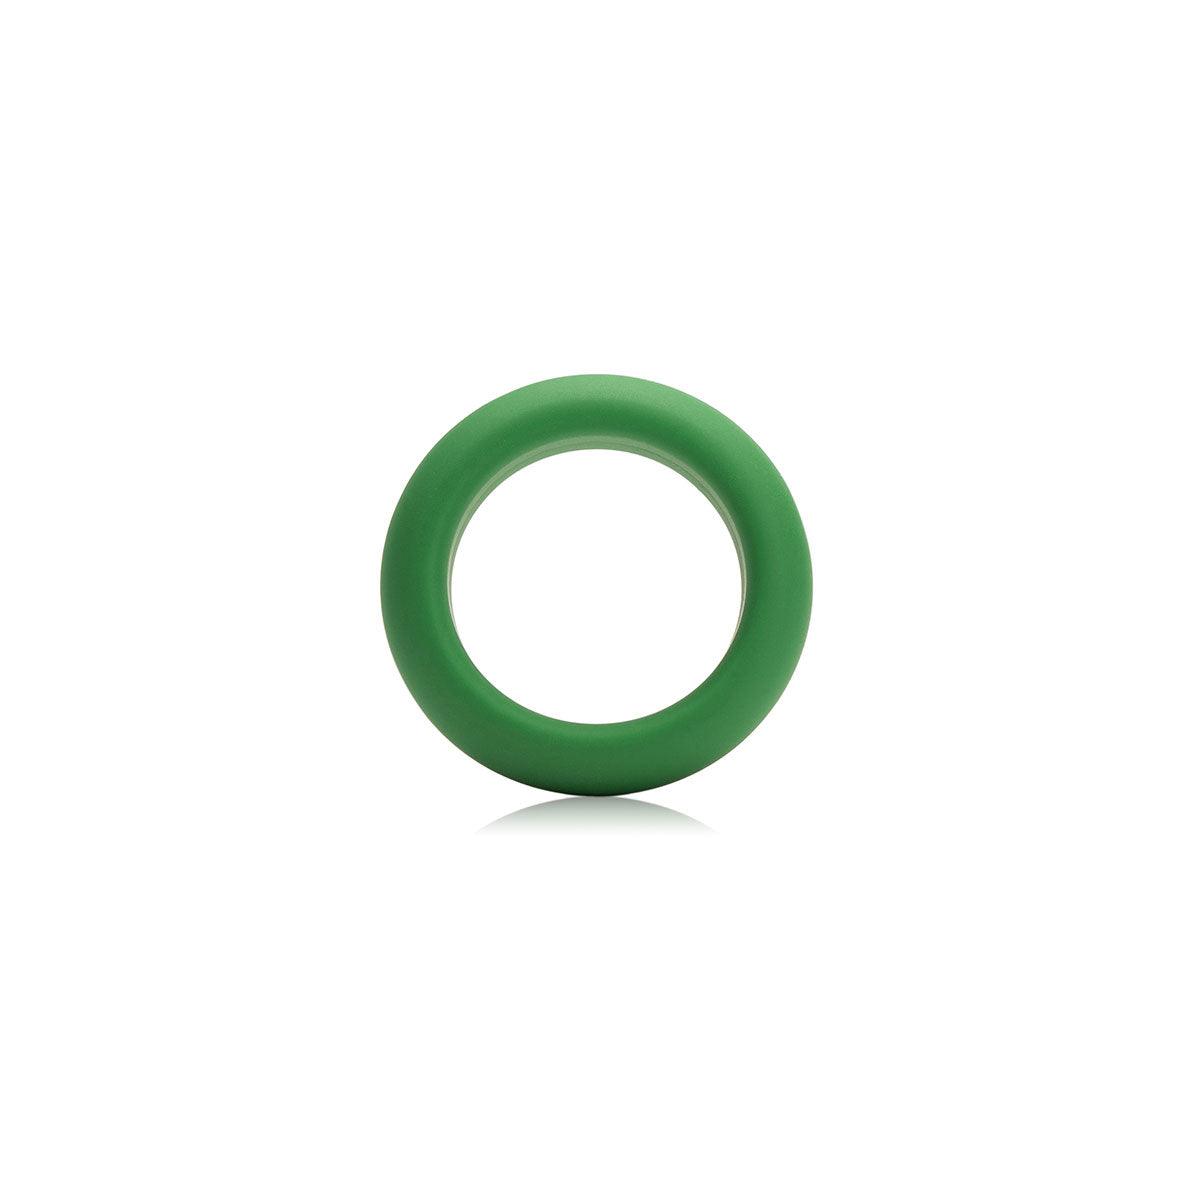 Je Joue Silicone C-Ring Level 2 - Green - shop enby